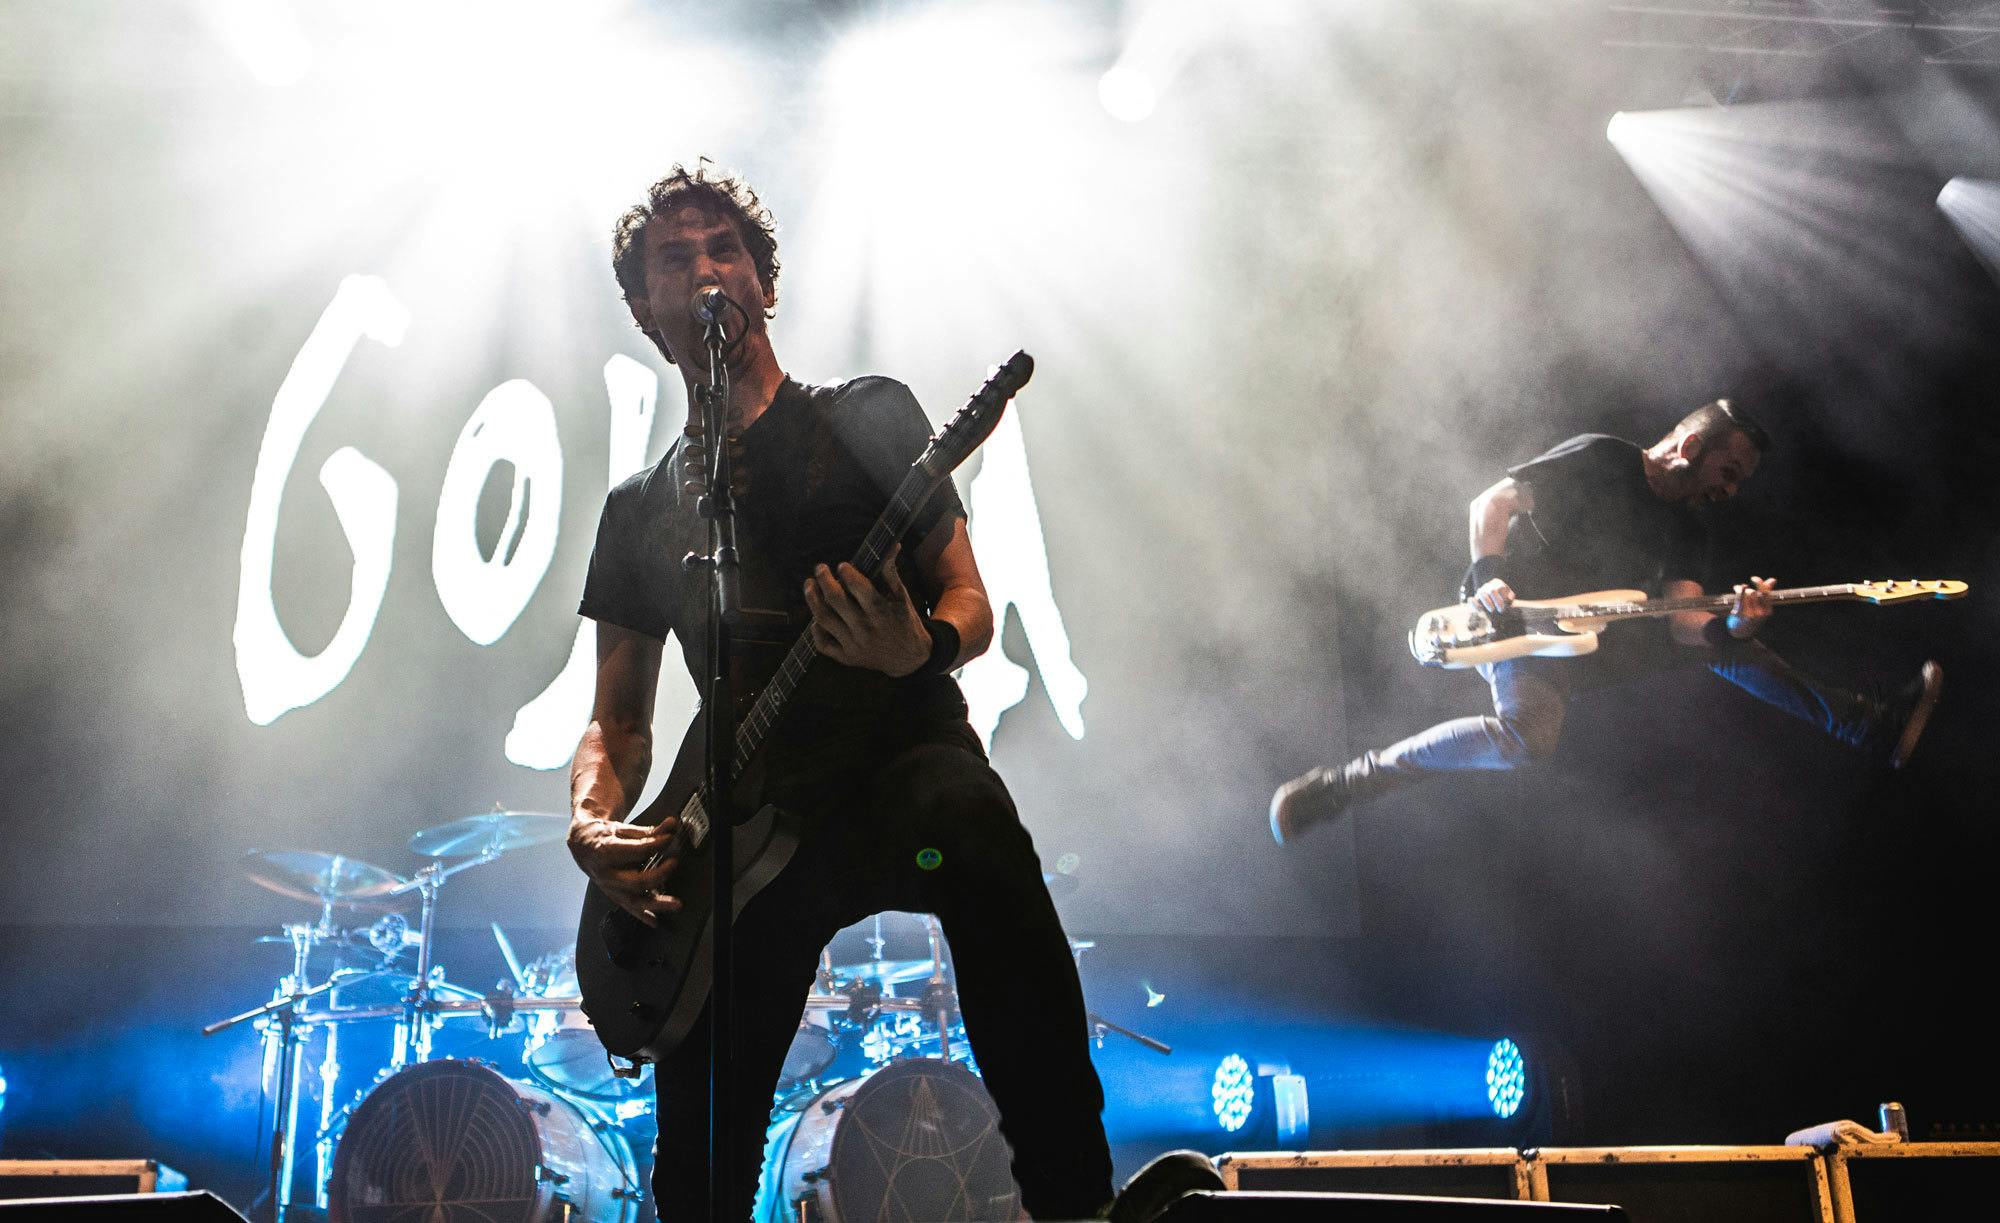 Gojira Are Teasing Something: "Another Place To Be"